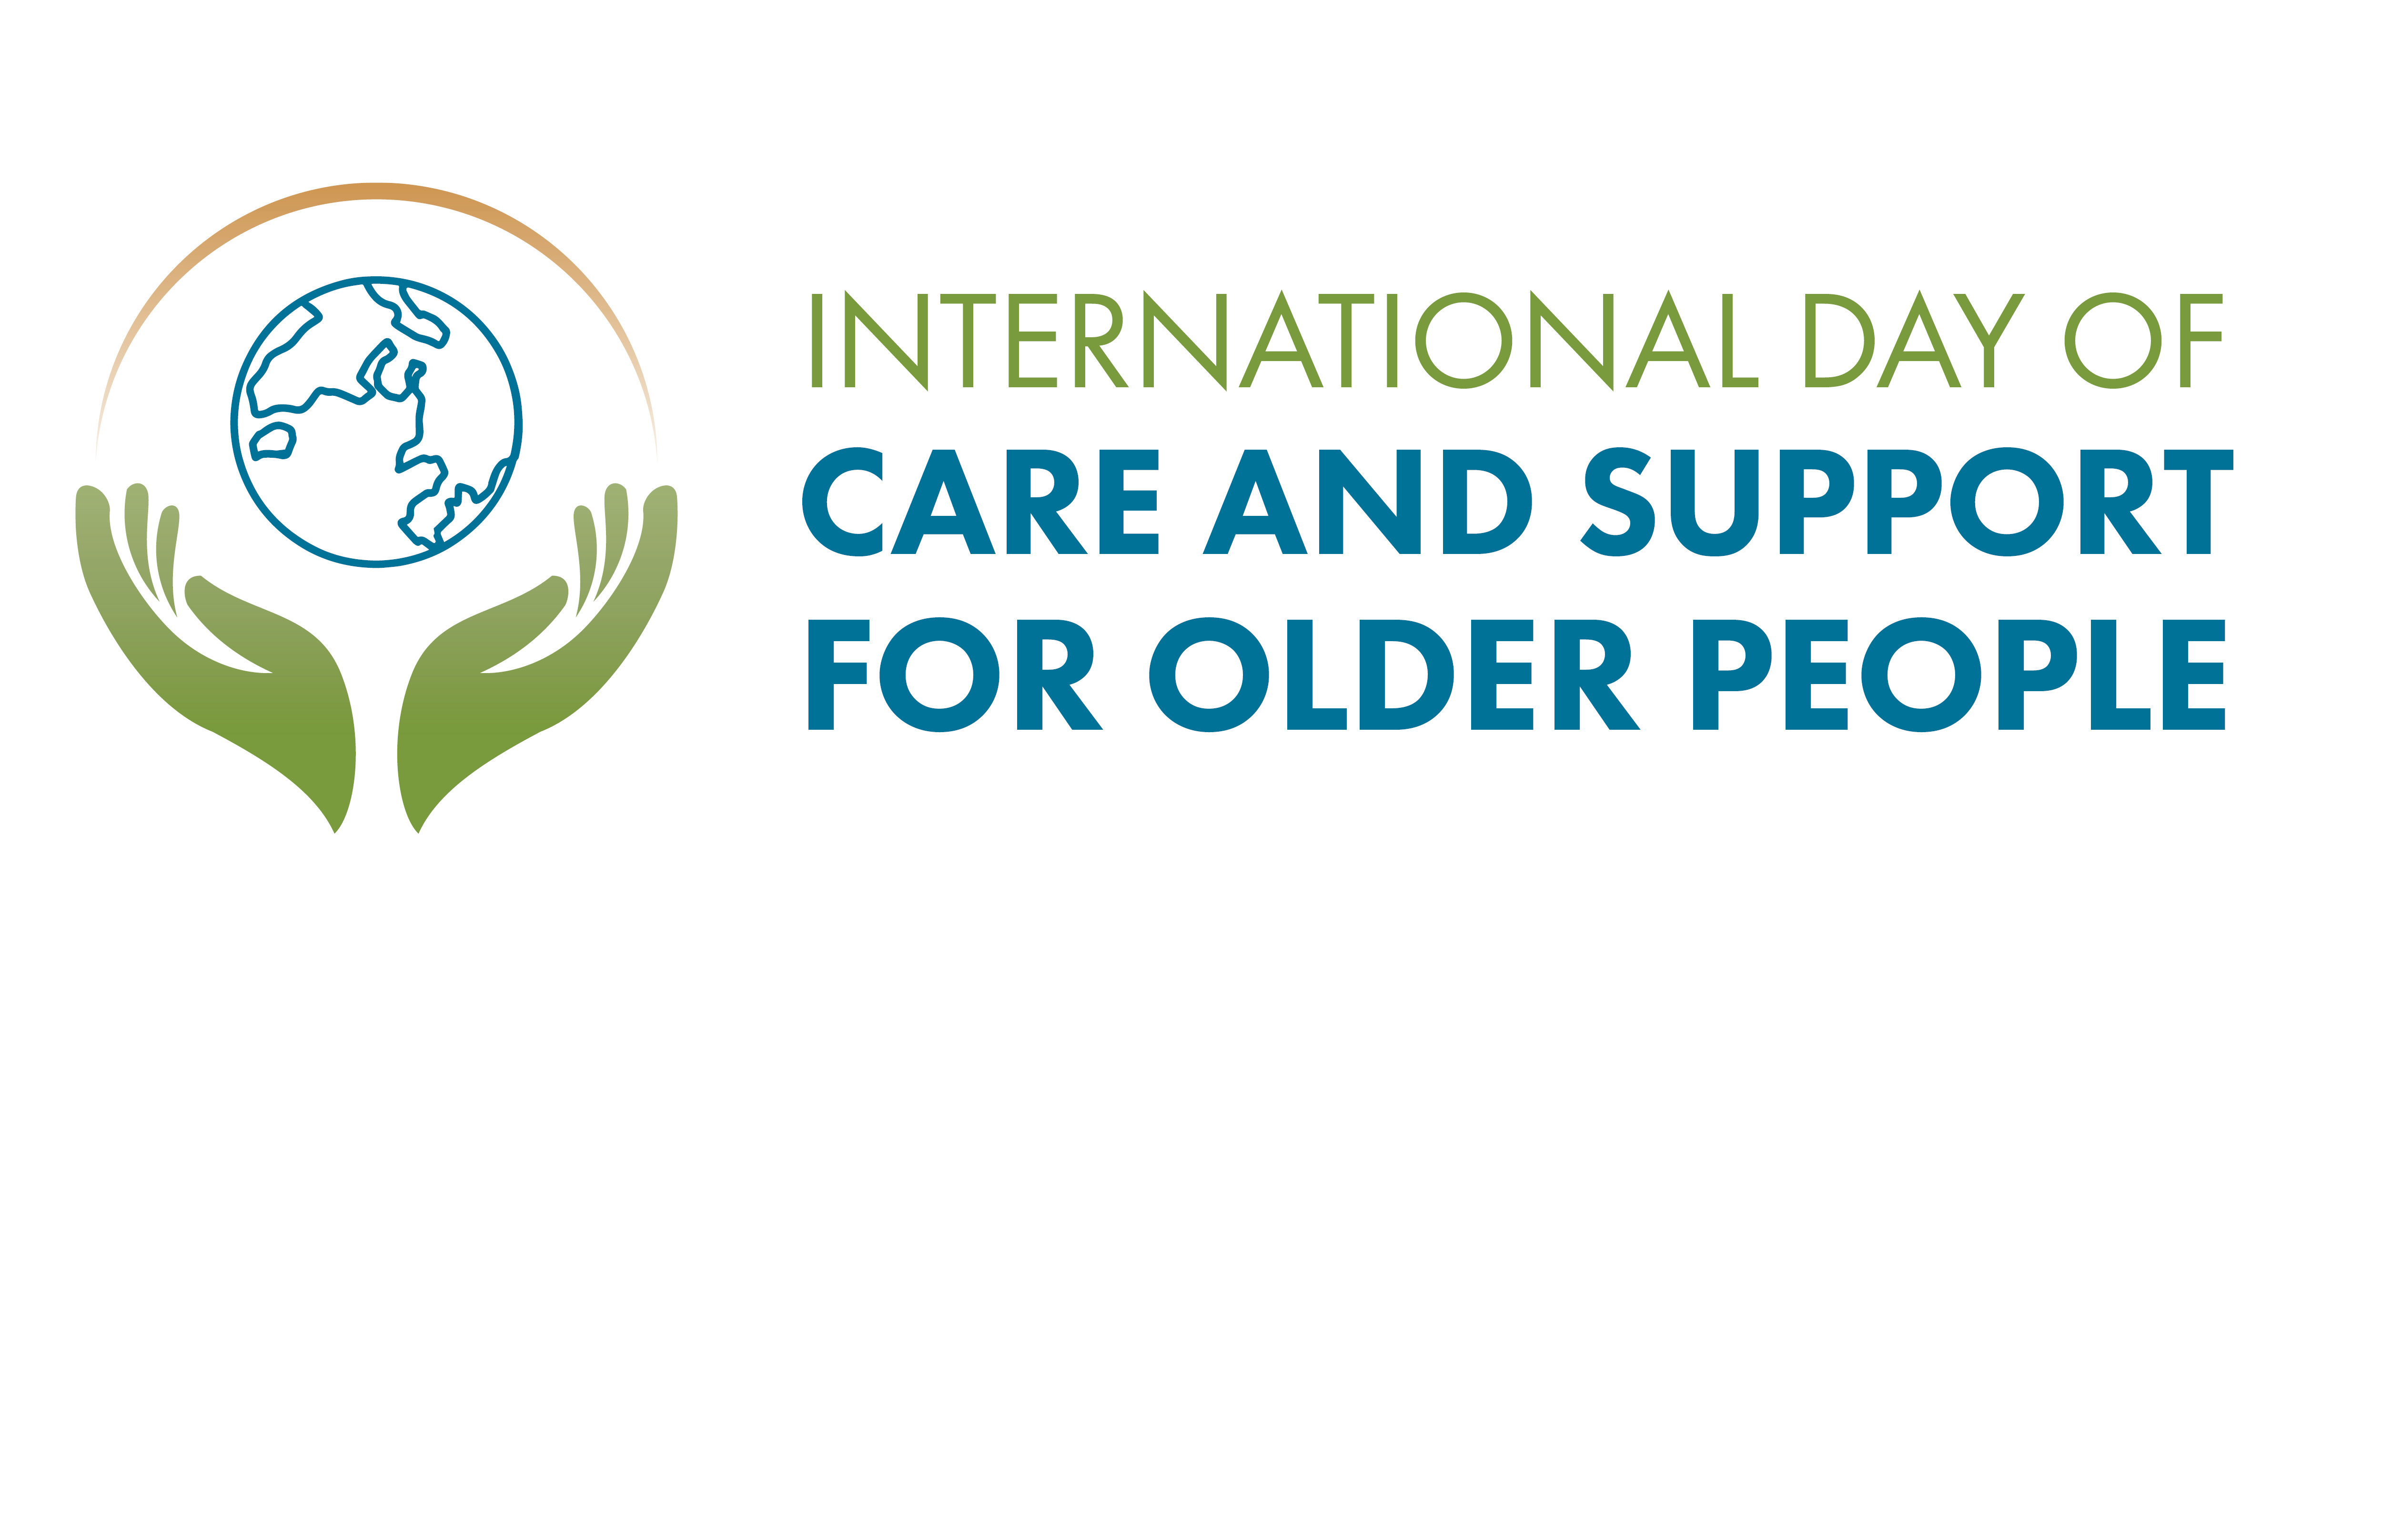 New International Day of Care and Support for Older People Declared